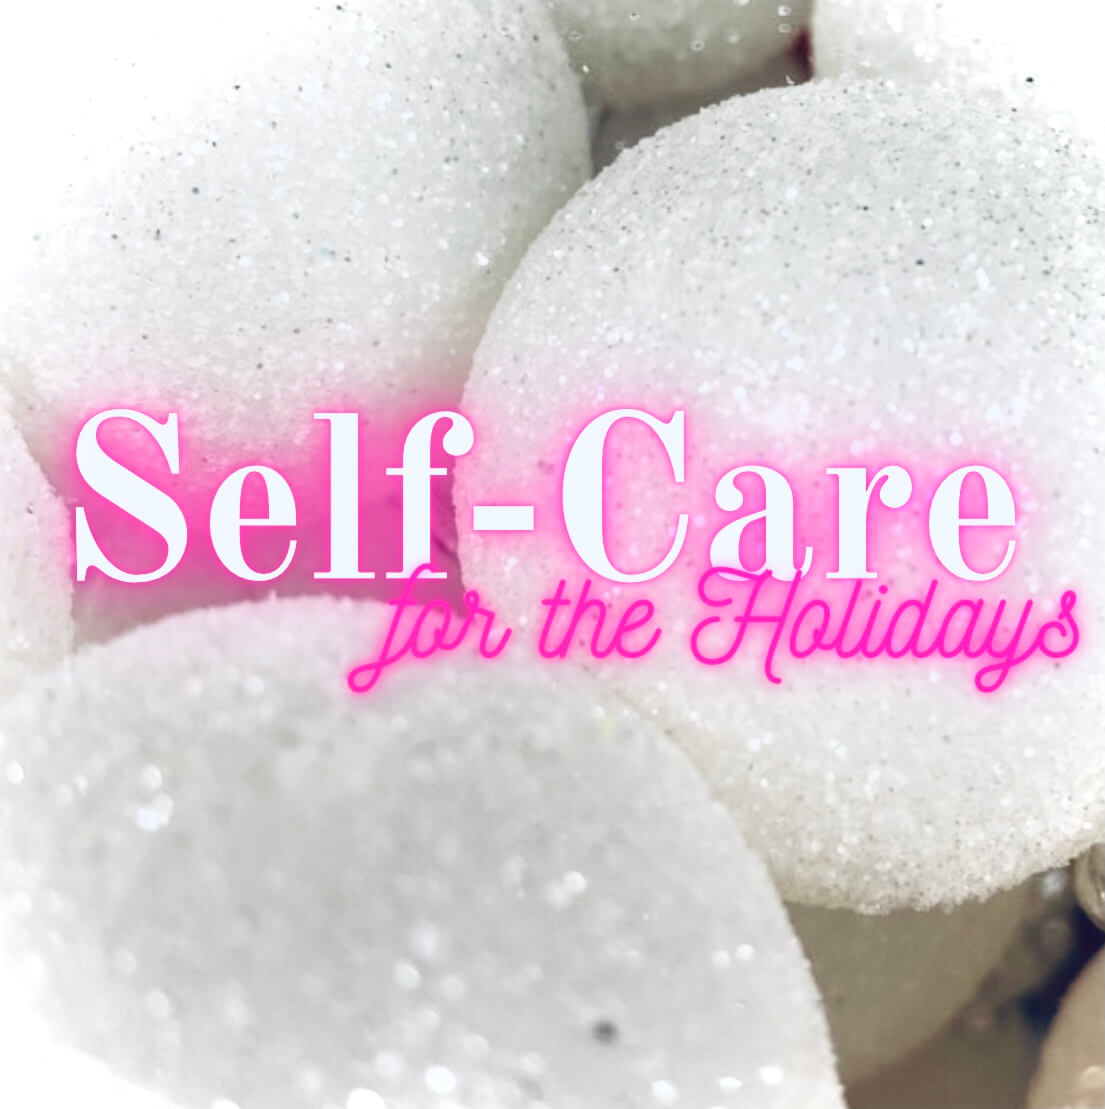 Image of holiday decor with self-care for the holidays